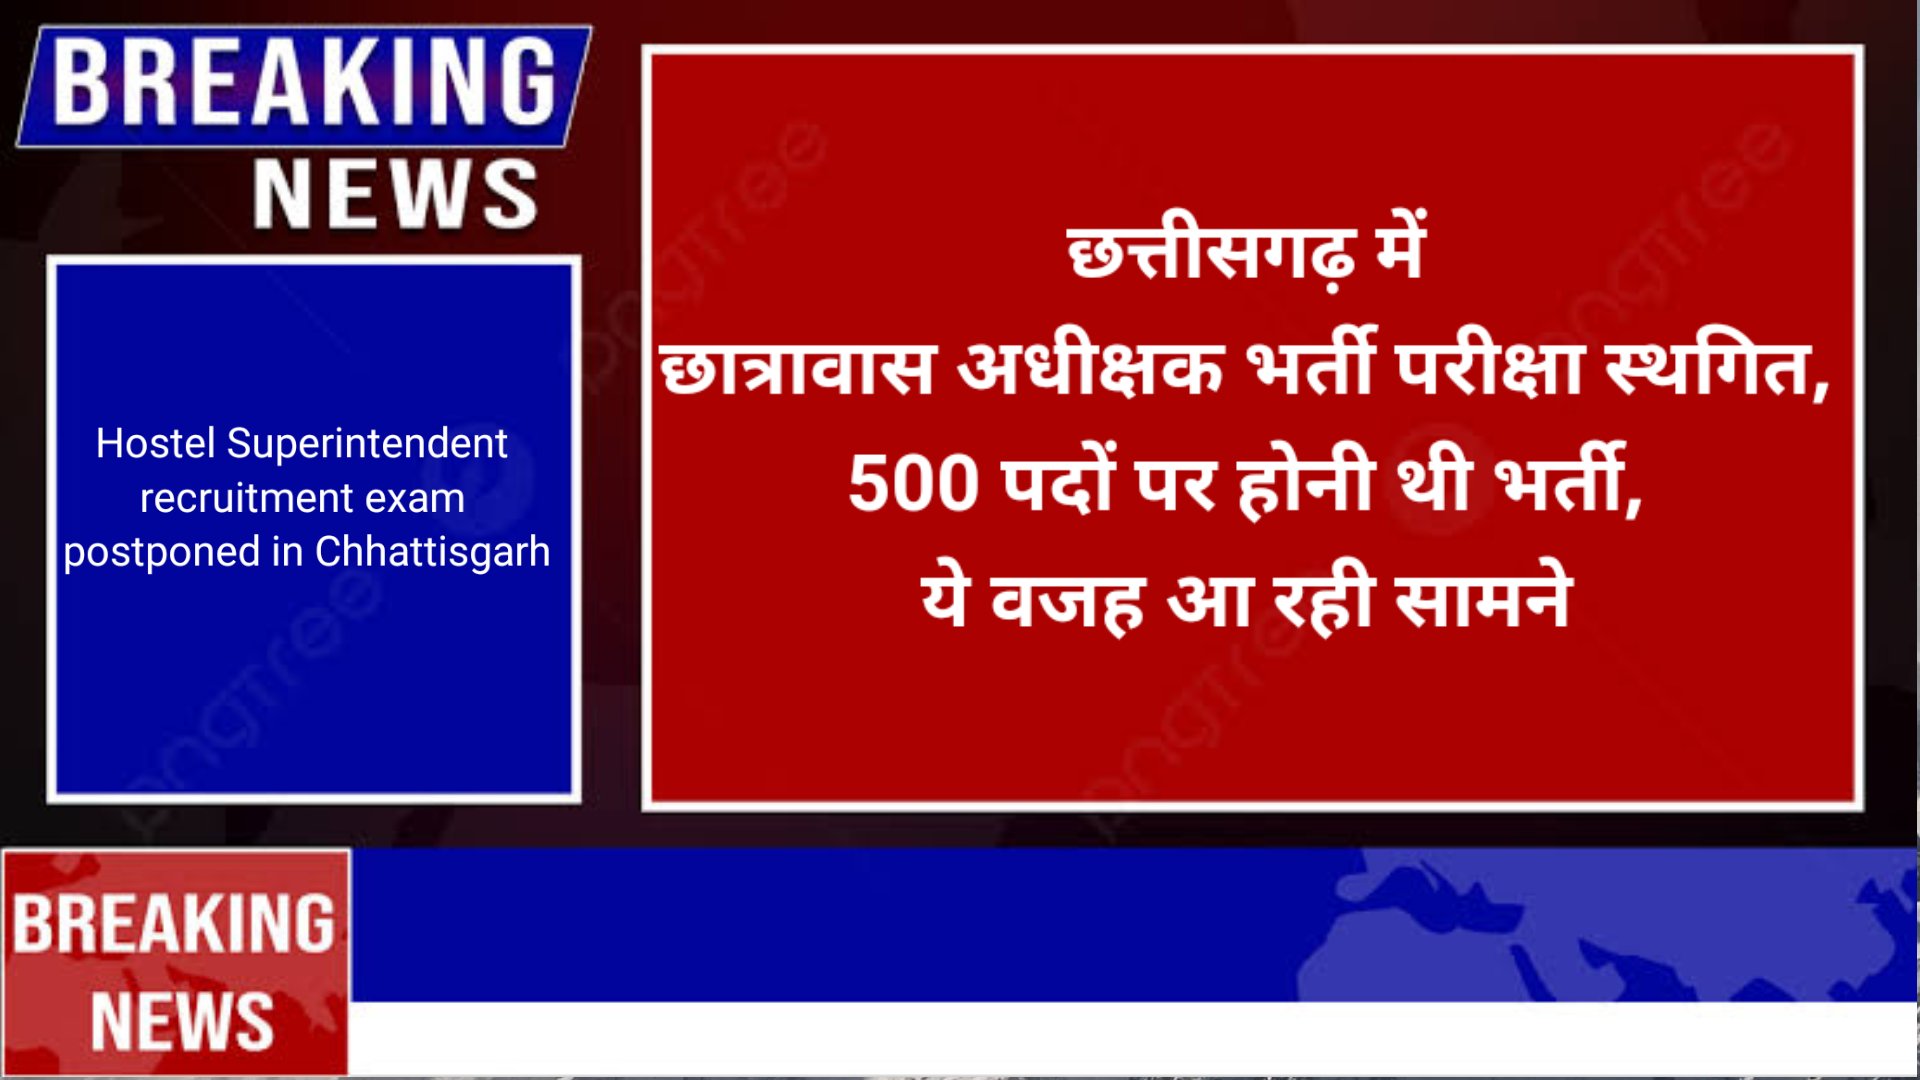 Hostel Superintendent recruitment exam postponed in Chhattisgarh, 500 posts were to be recruited, this reason is coming in front